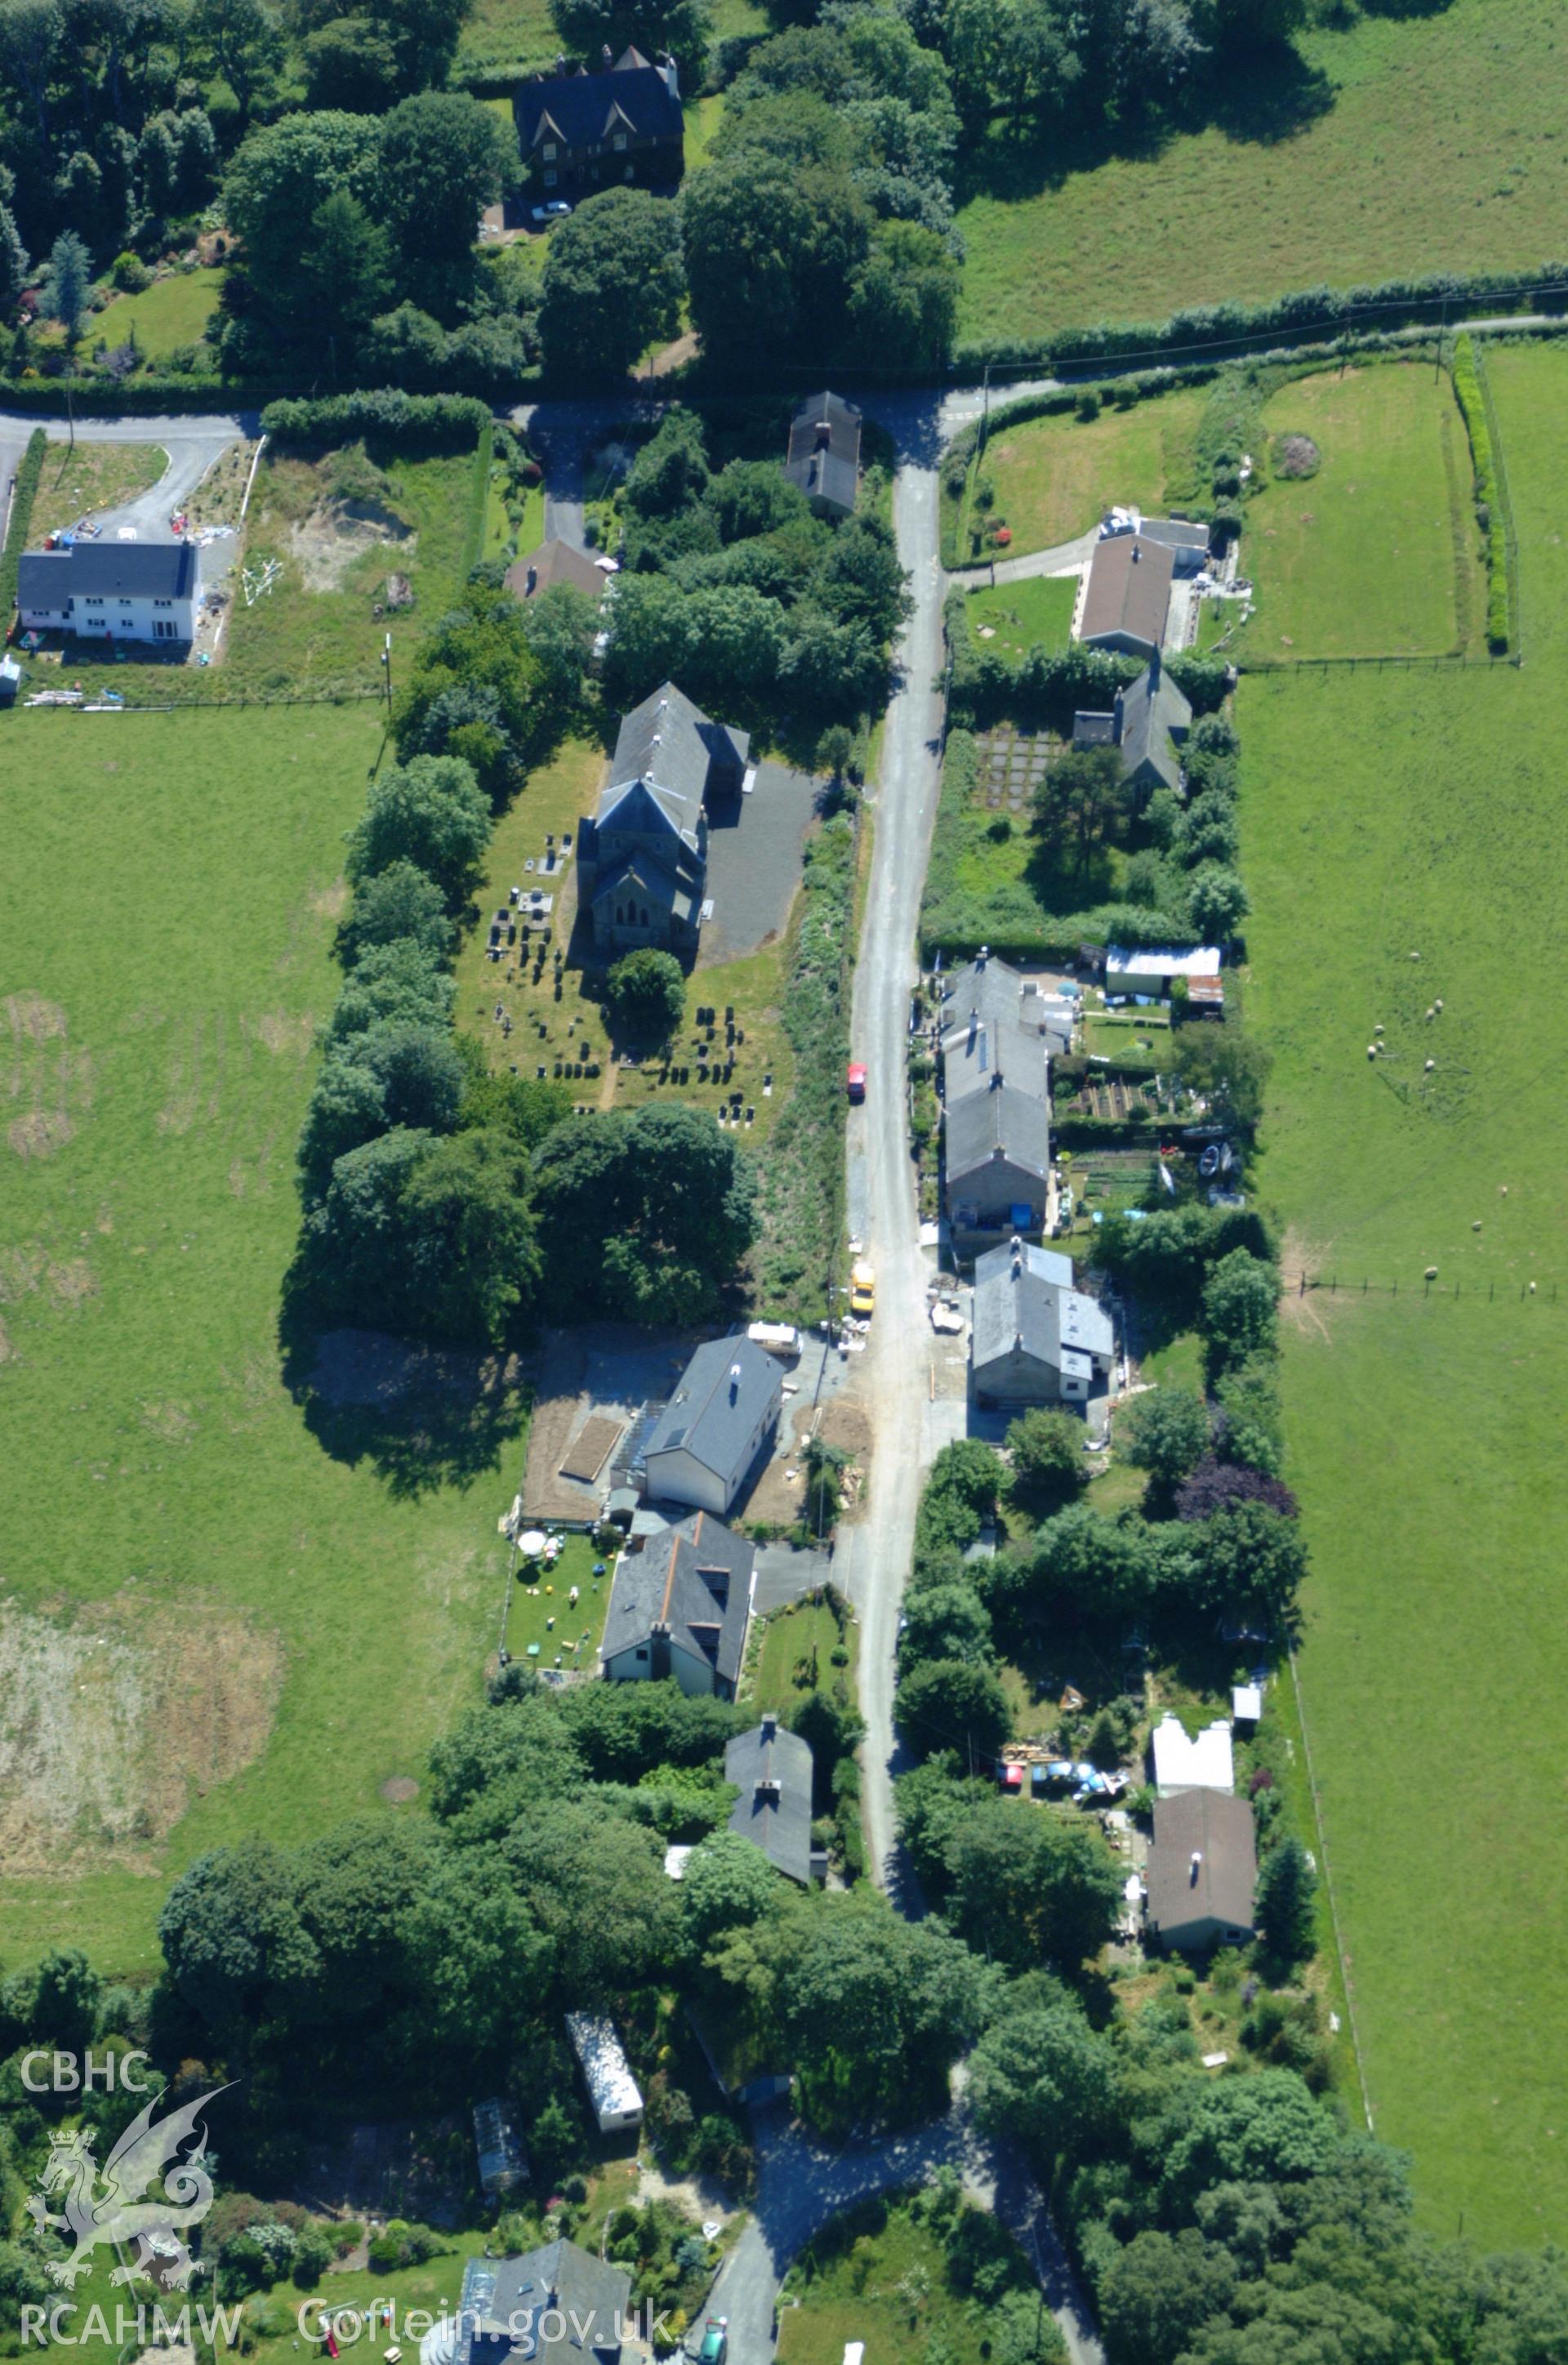 RCAHMW colour oblique aerial photograph of St Peter's Church, Bont-goch (Elerch) taken on 14/06/2004 by Toby Driver